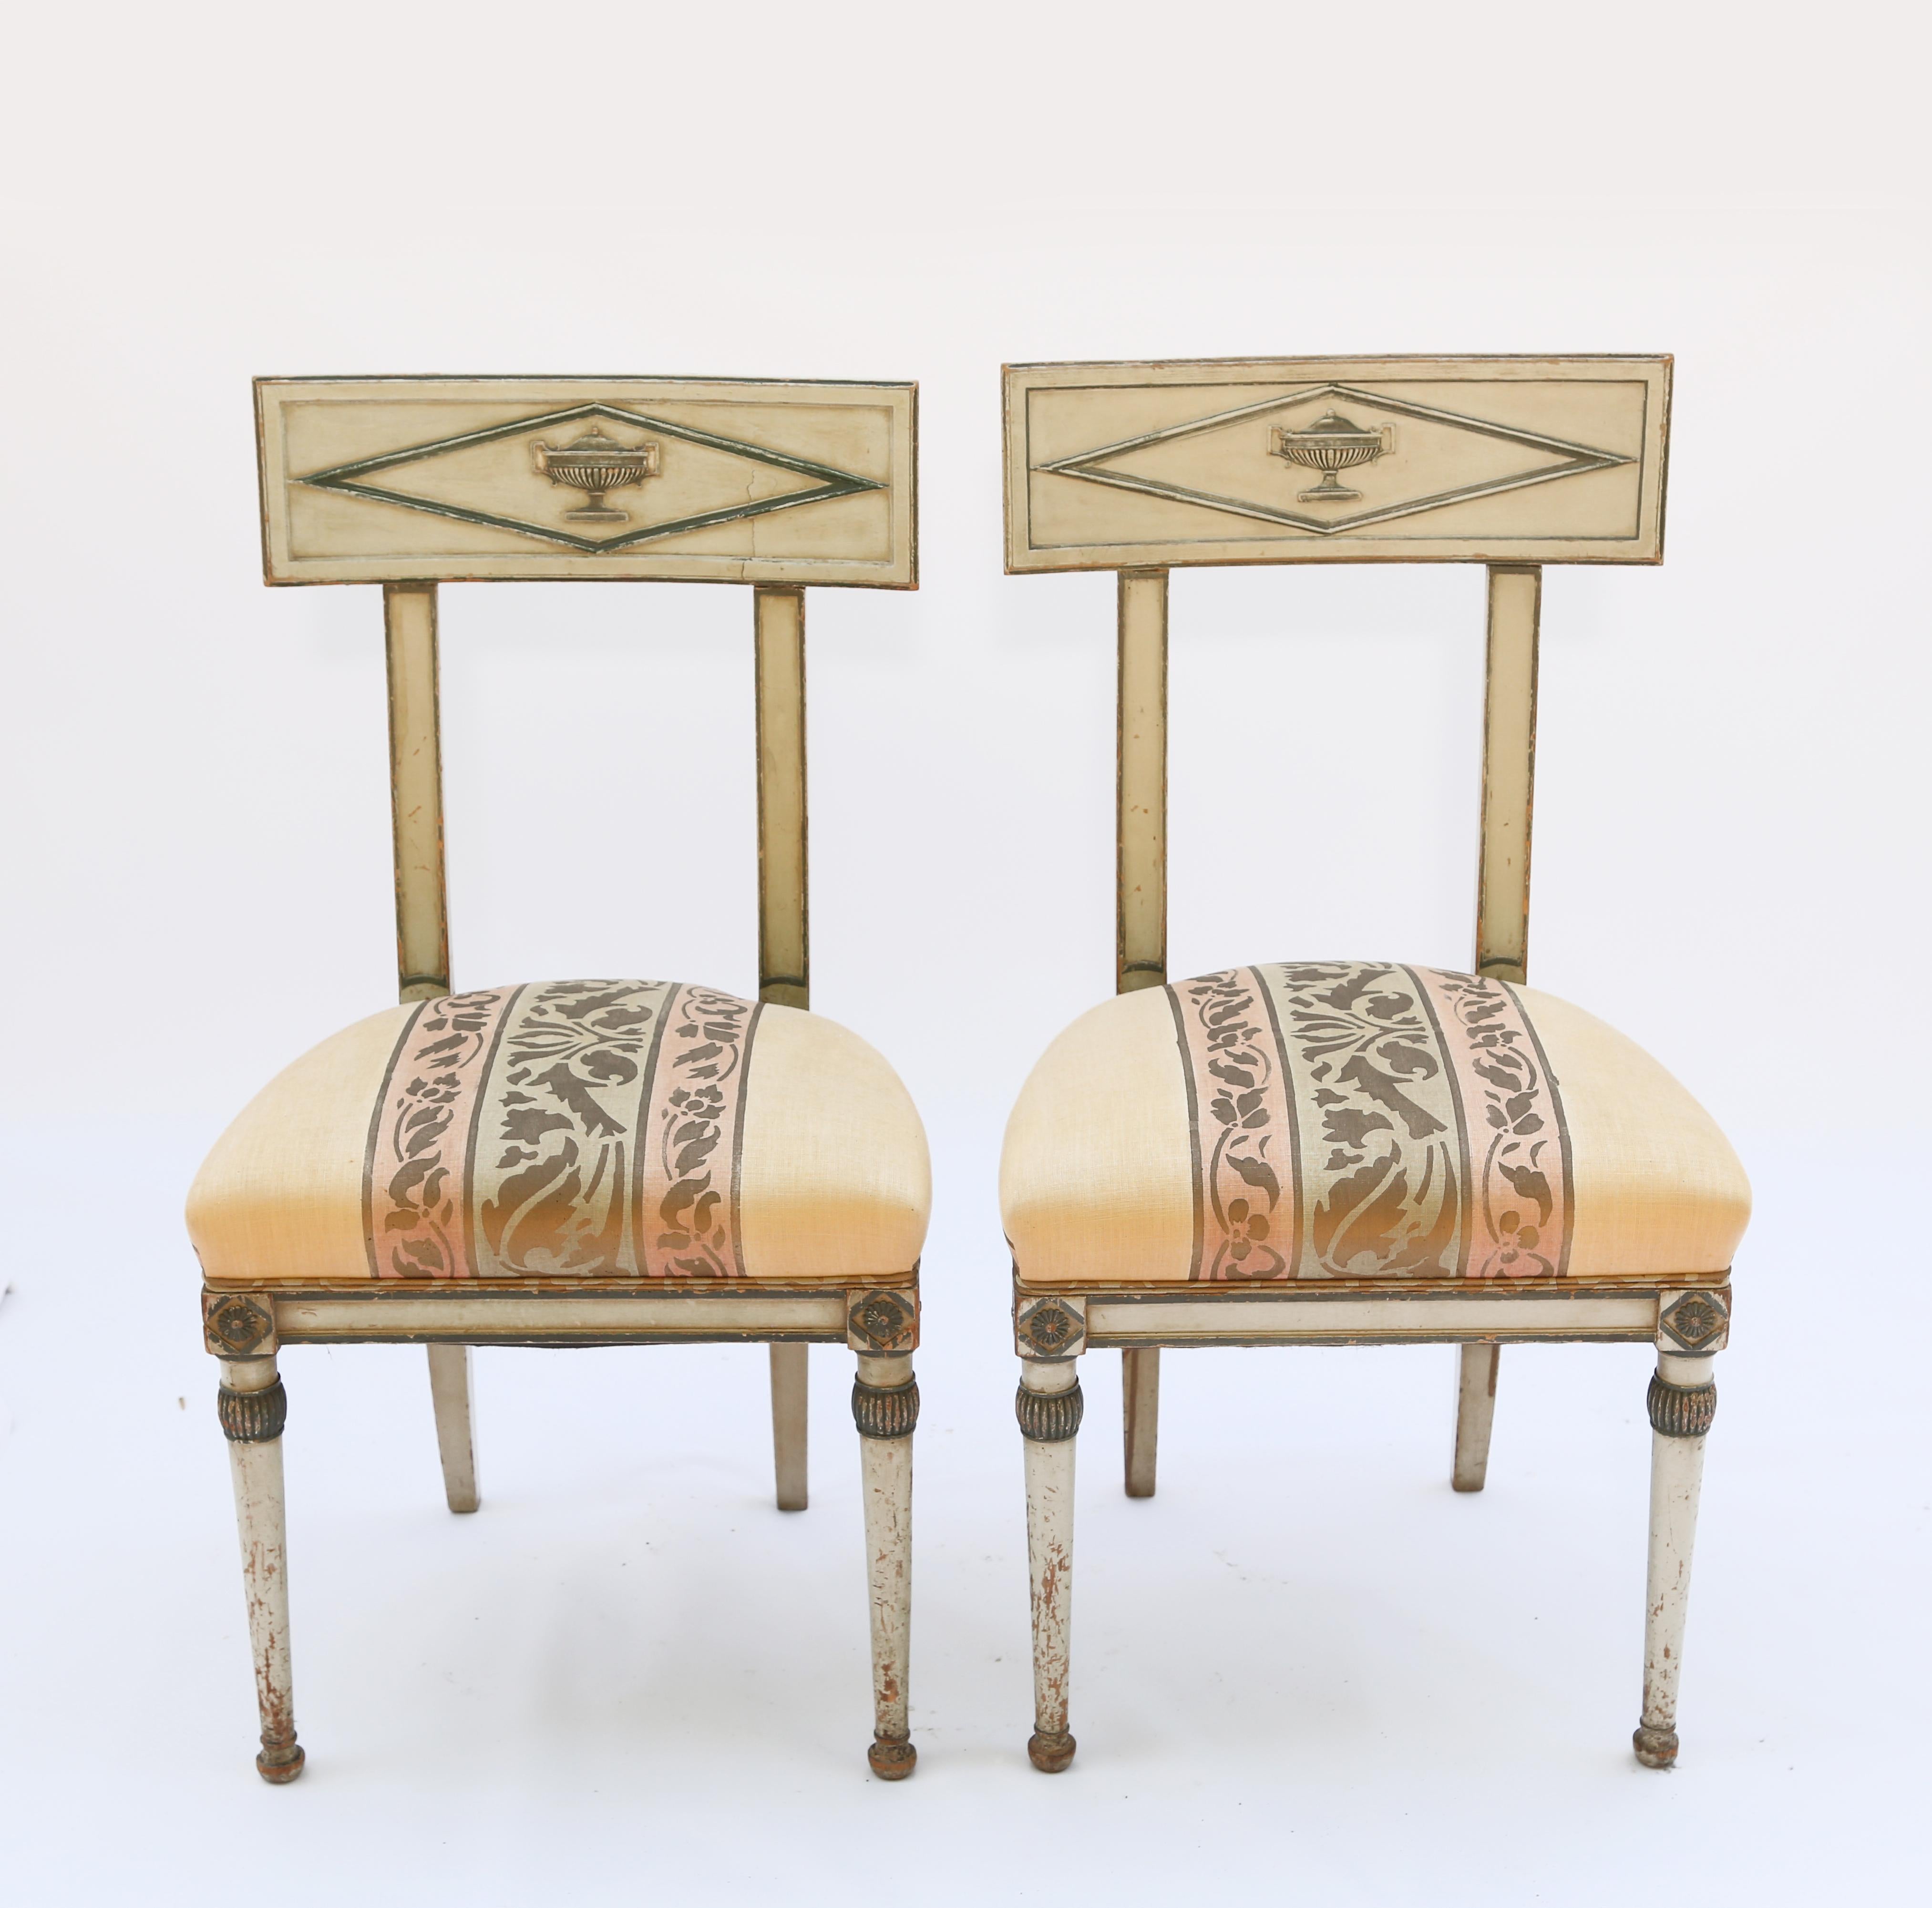 Wood Pair of Late 18th/Early 19th Century, Painted Italian Neoclassical Side Chairs For Sale